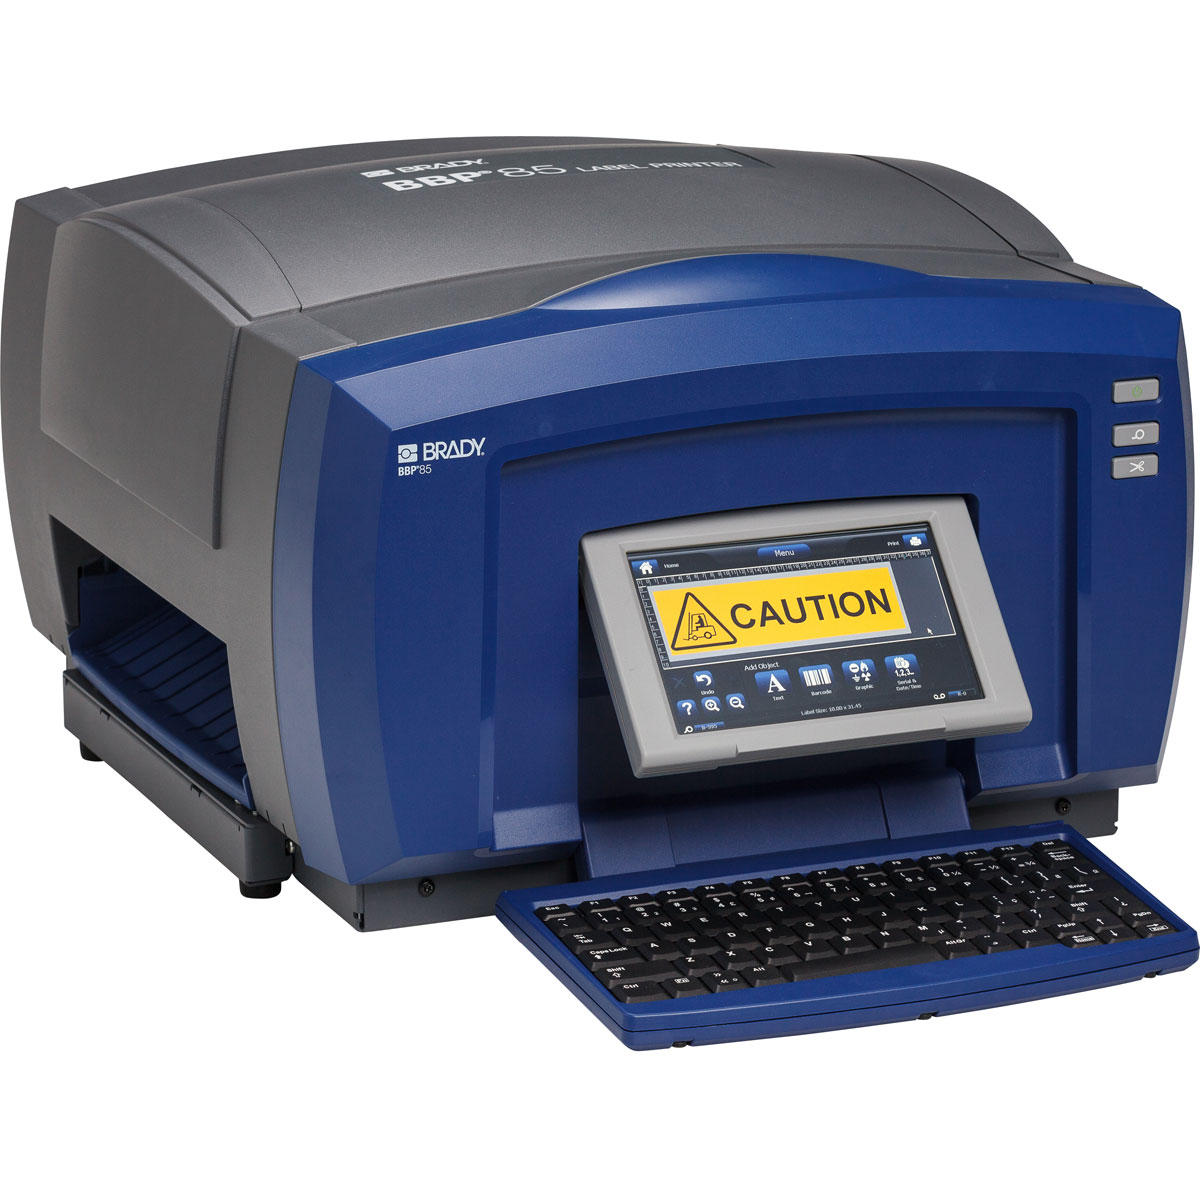 BBP85 Industrial Sign and Label Printer with Workstation Safety and Facility ID Software